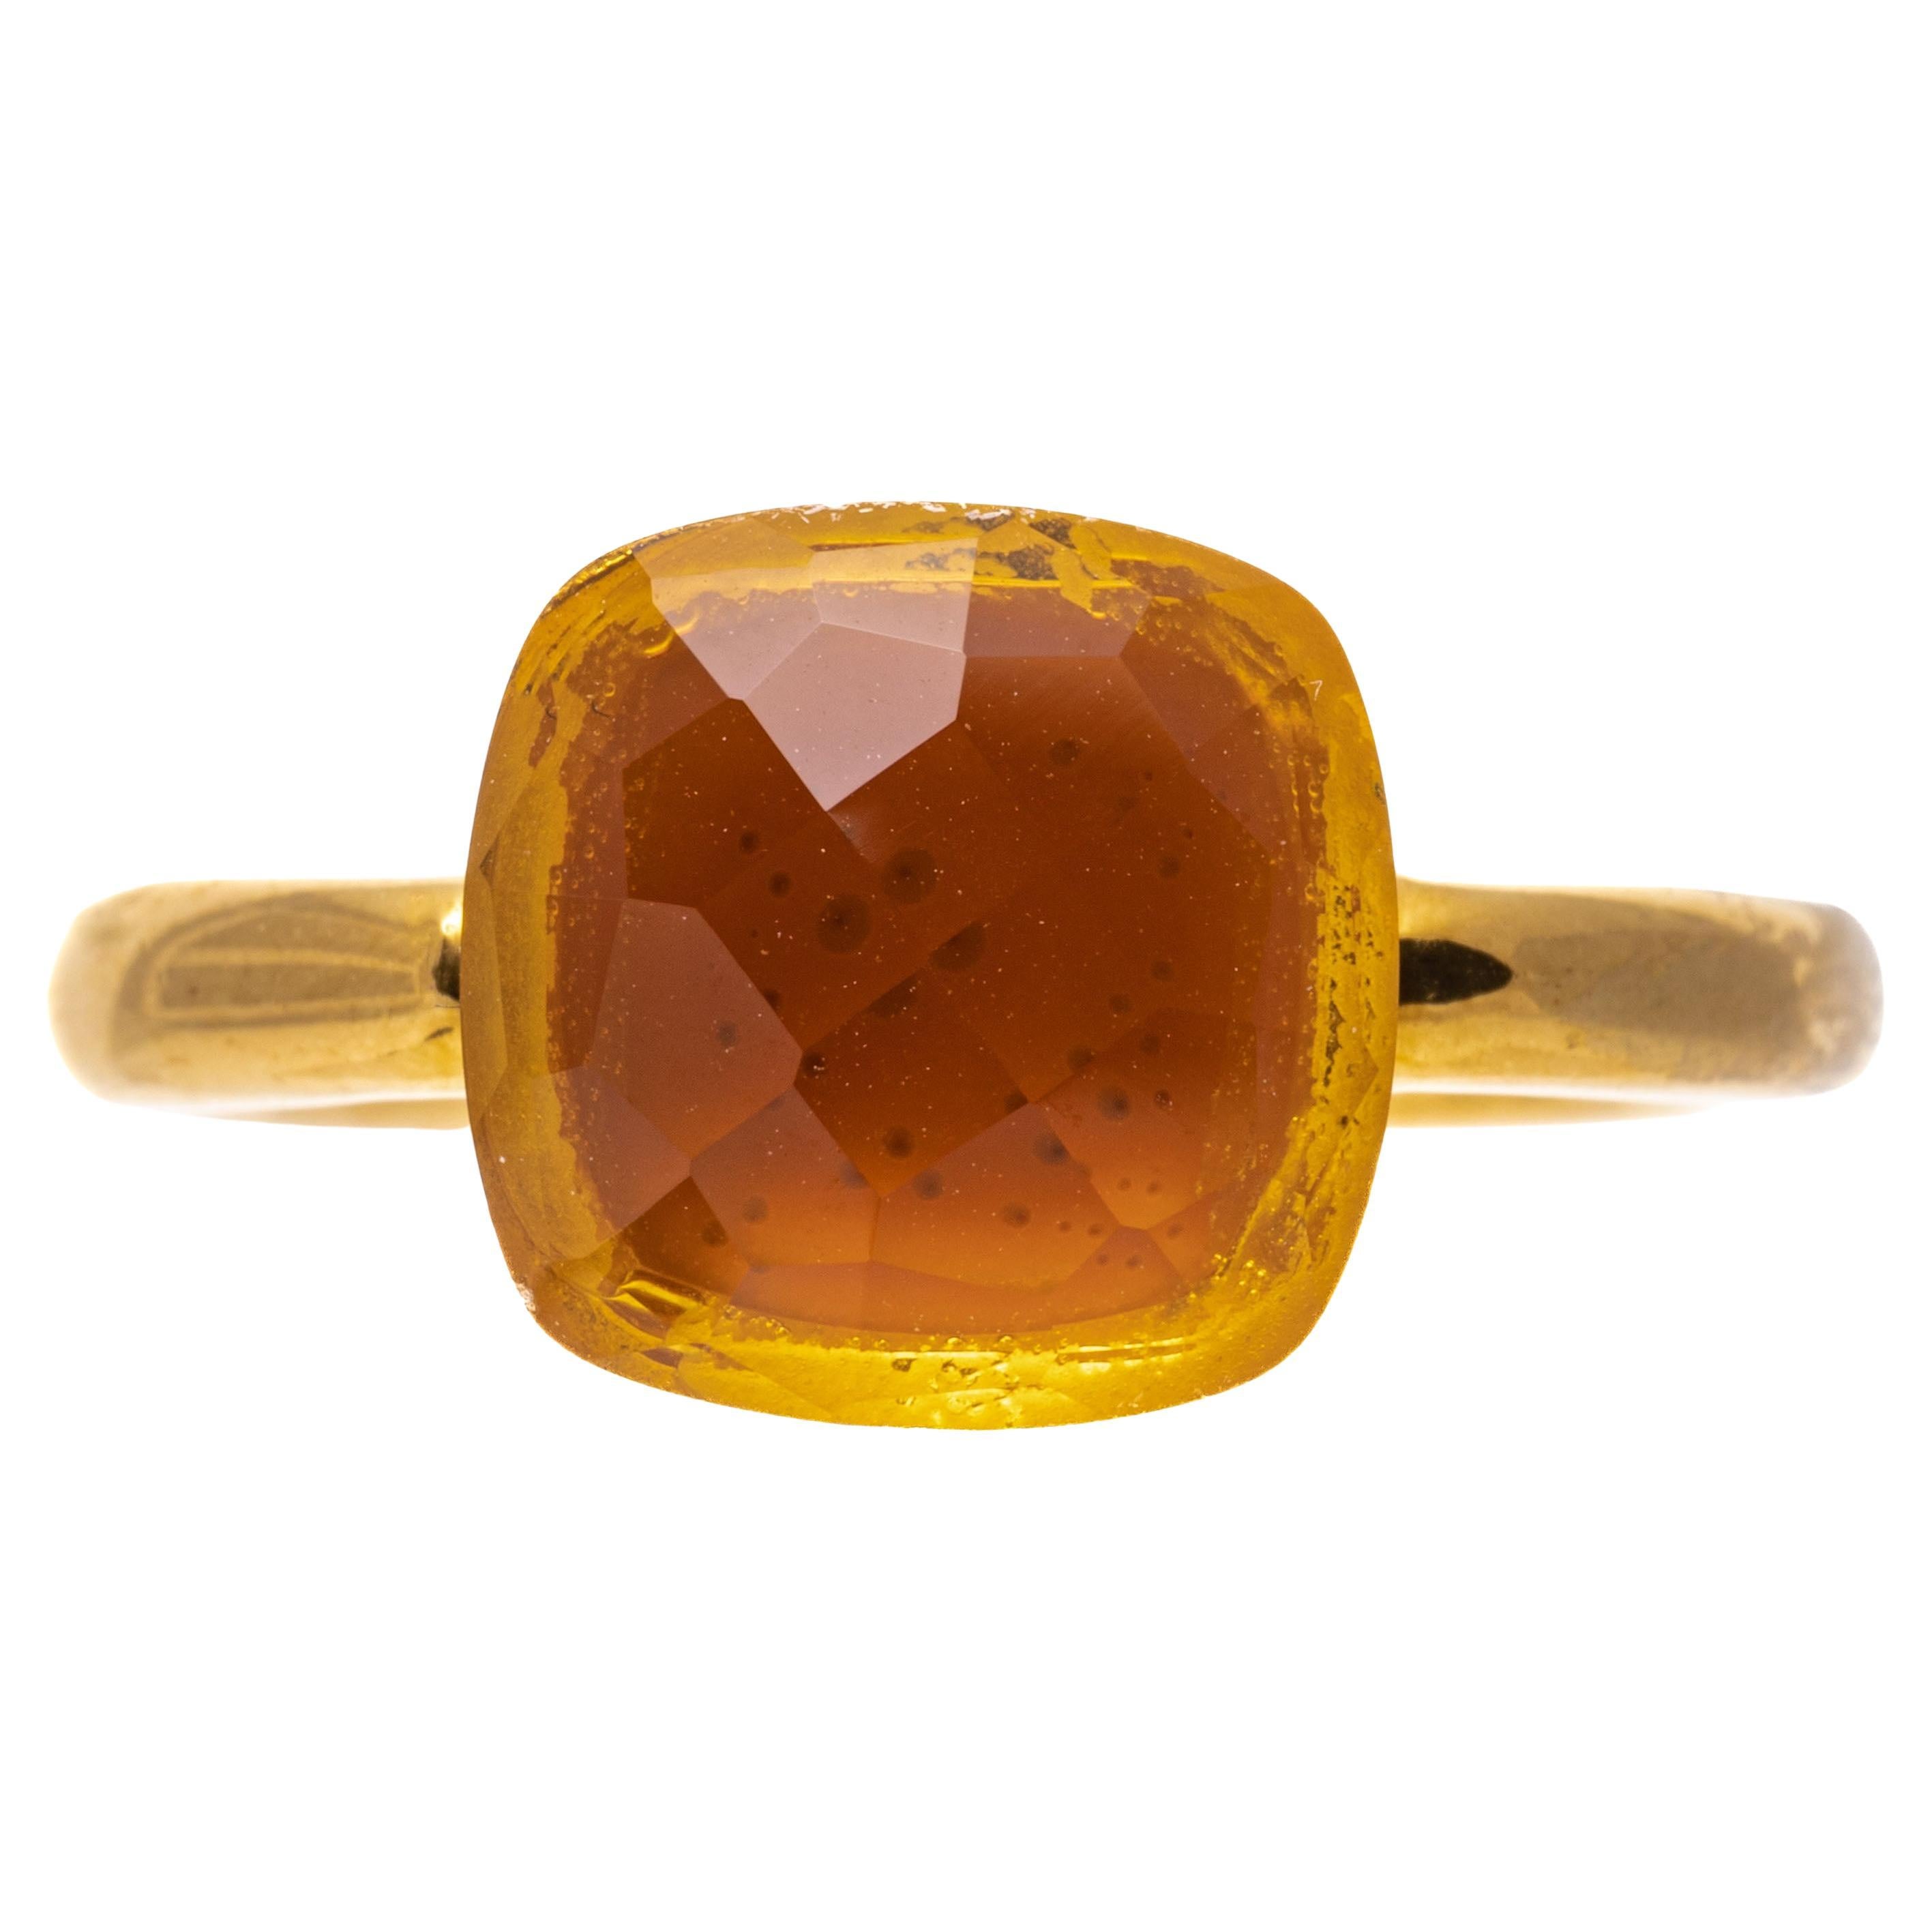 18k yellow gold ring. This beautiful, contemporary ring features a checkerboard cushion cut, medium yellow orange color citrine, approximately 3.04 CTS, set atop a yellow gold simple tube style shank.
Marks: 18k
Dimensions: 3/8